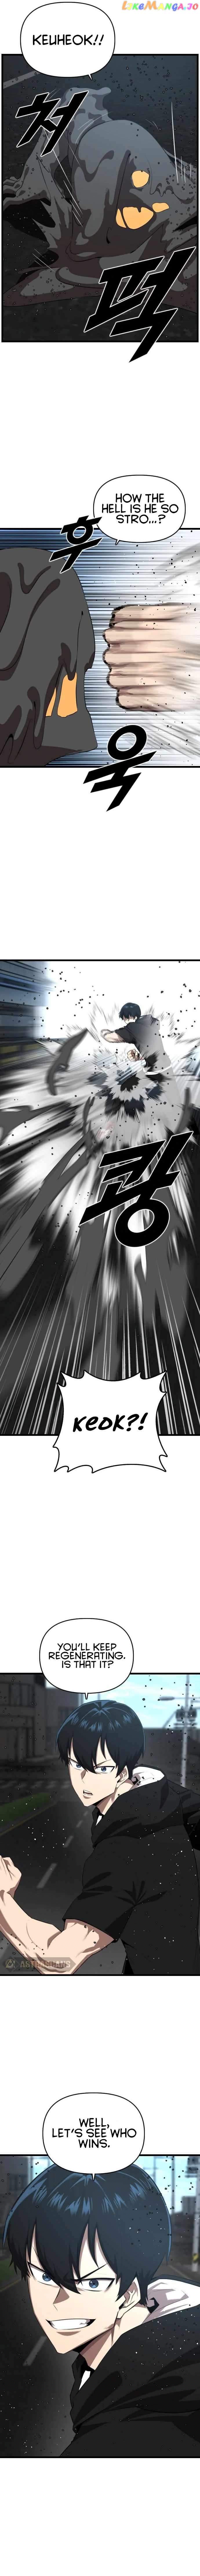 Rental Hero Chapter 20 - page 11